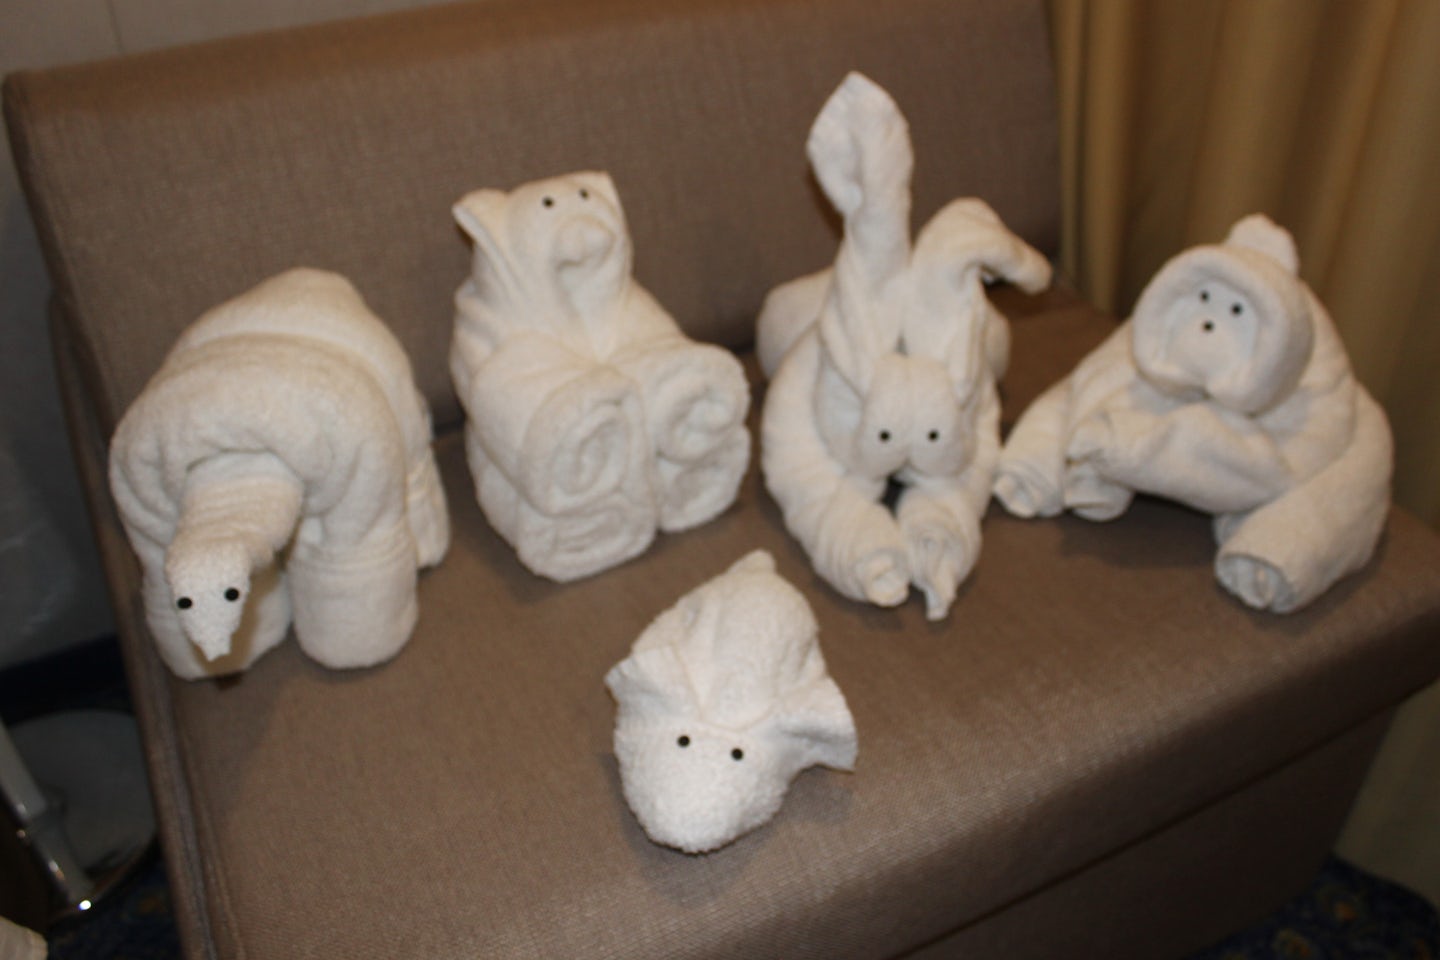 Our collection of towel animals at the end of the cruise.